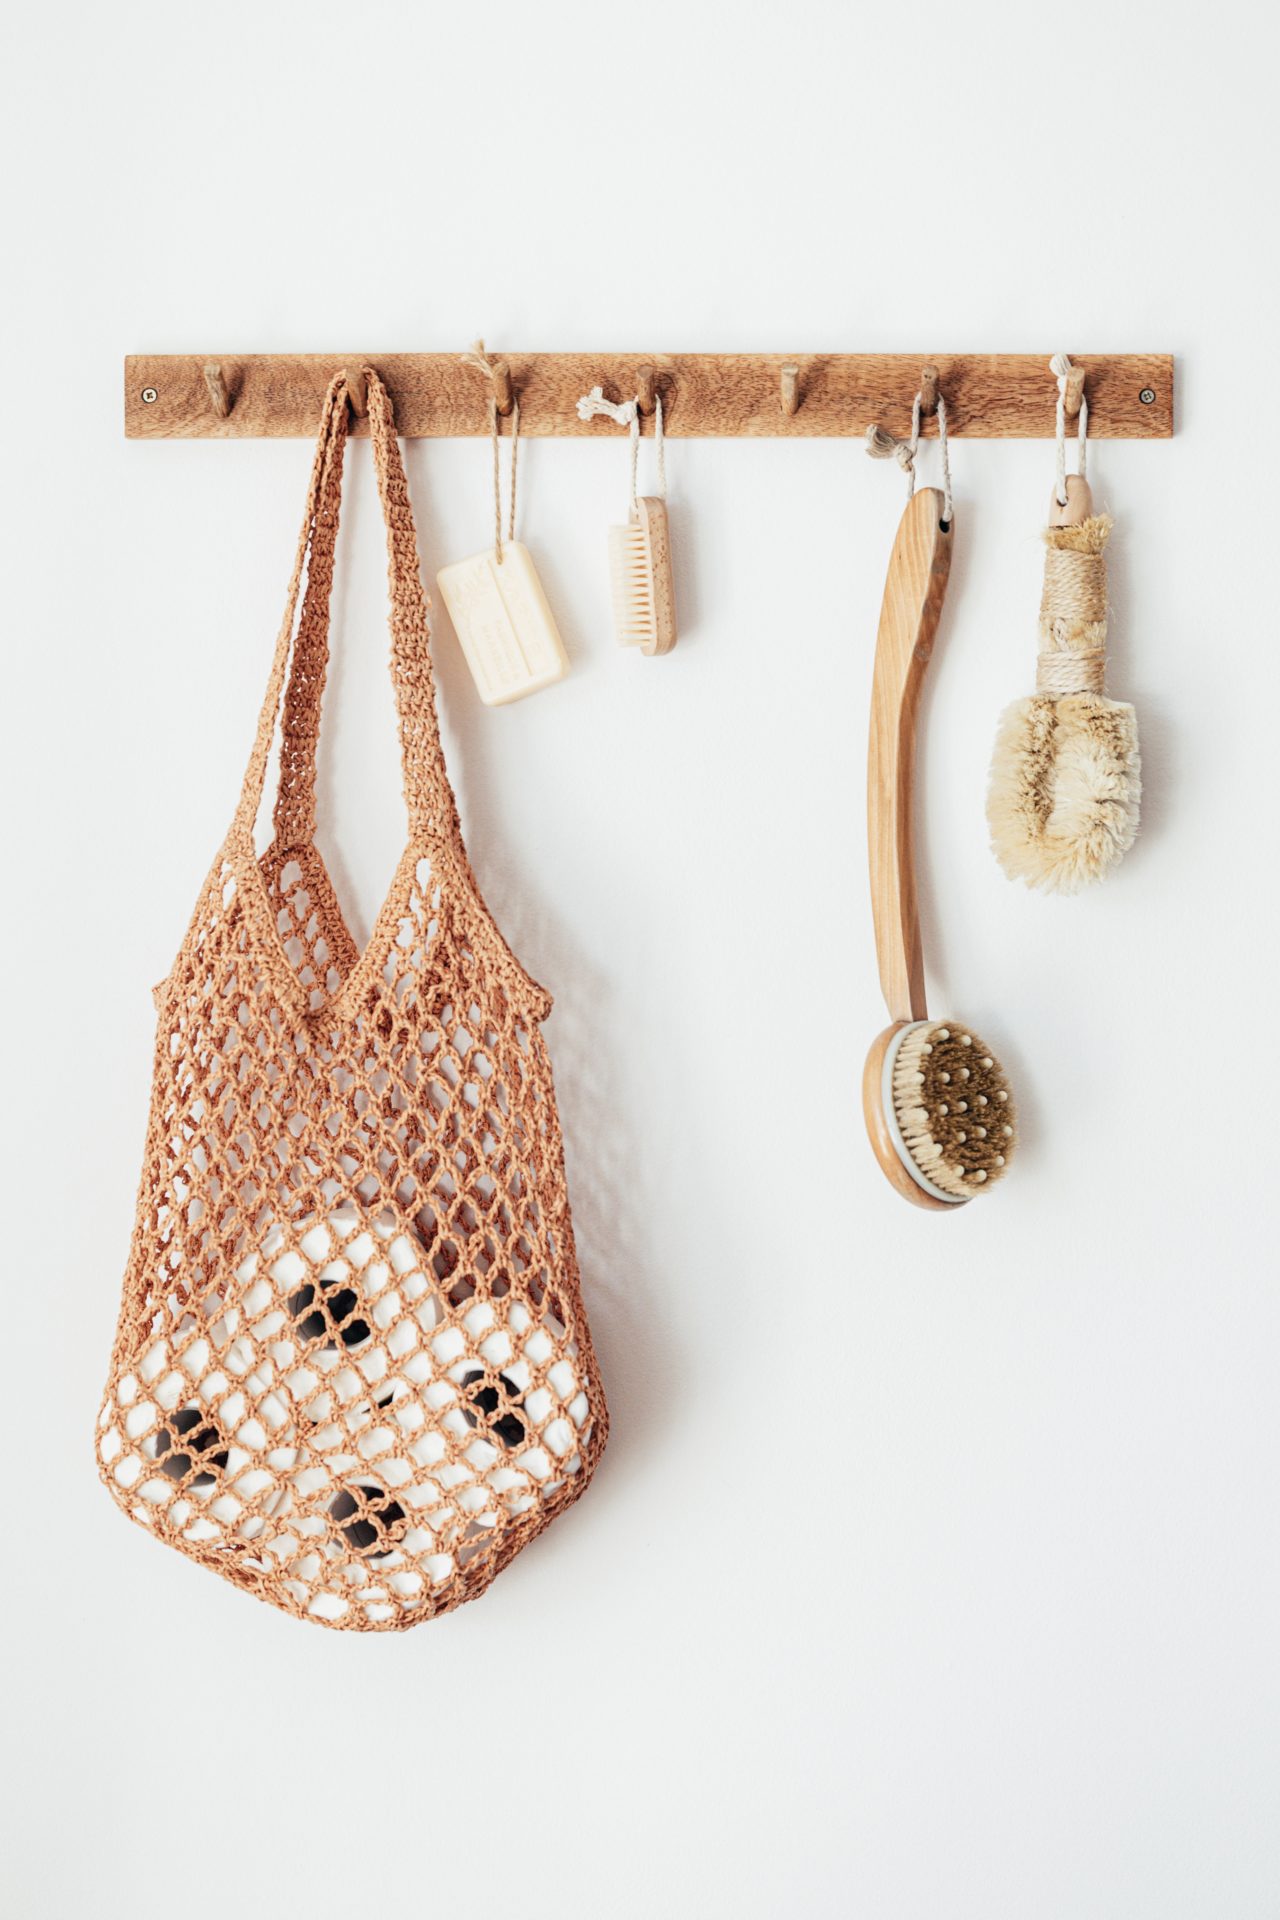 sustainable bamboo products